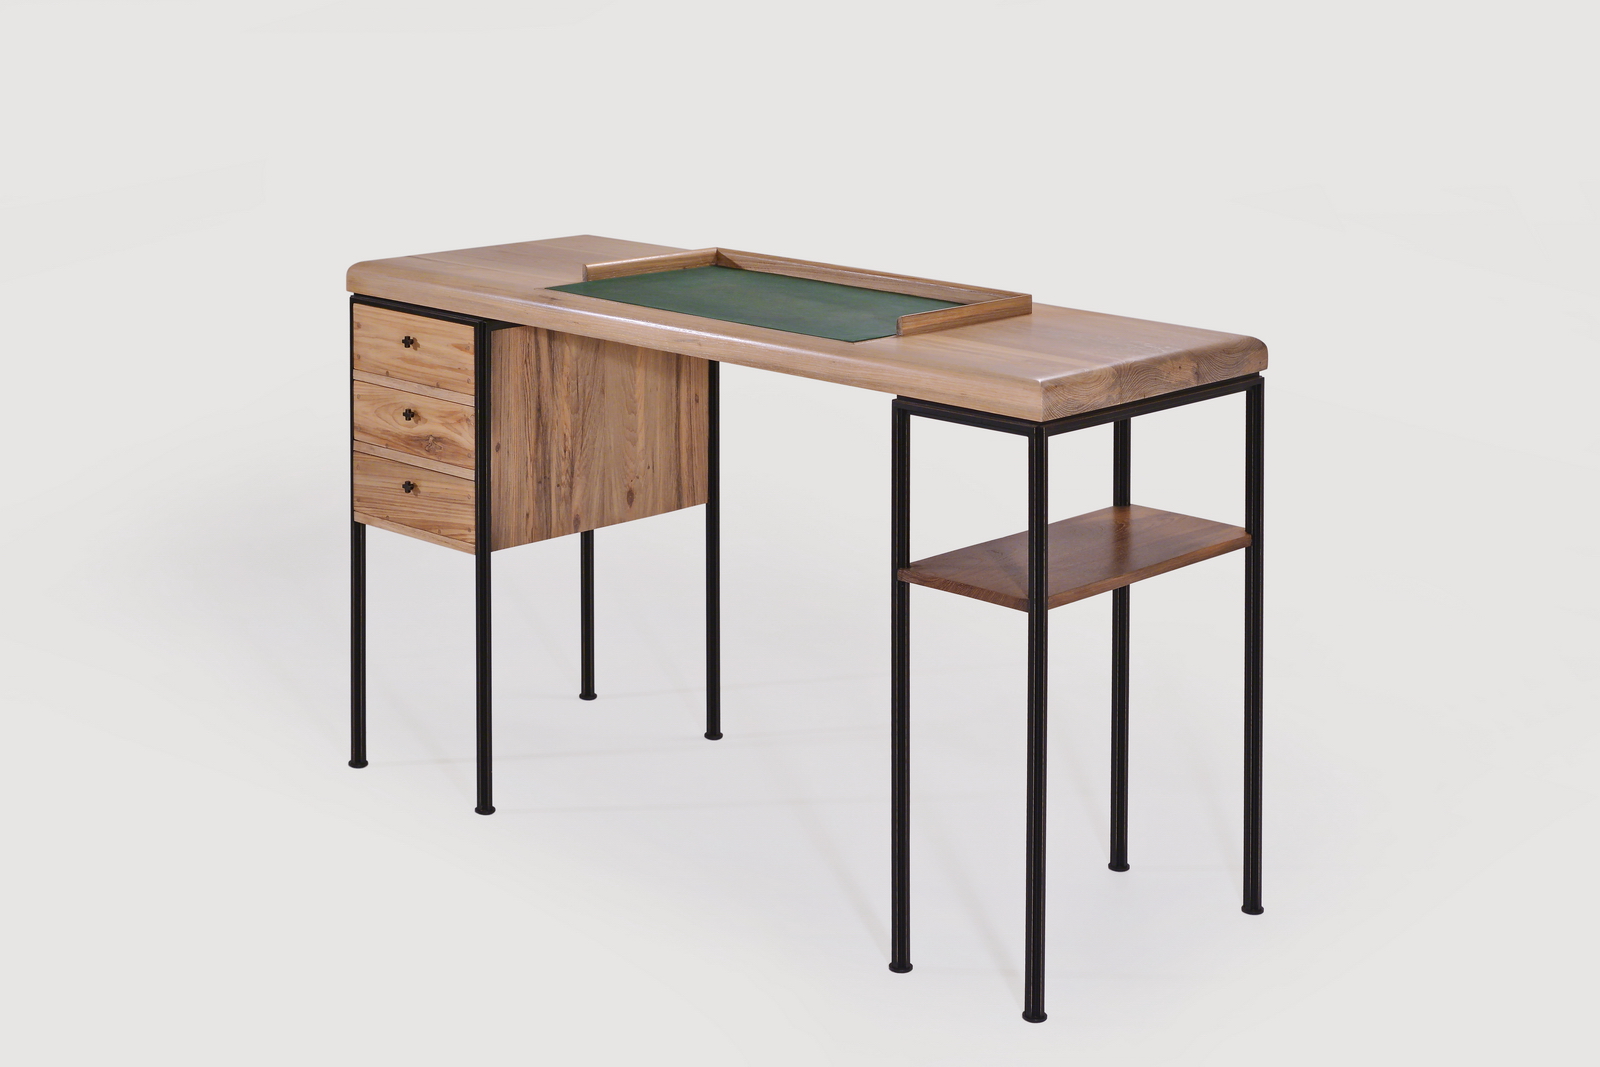 PTendercool-Customized Desk-BS3-TE-BL-NO-191015-02